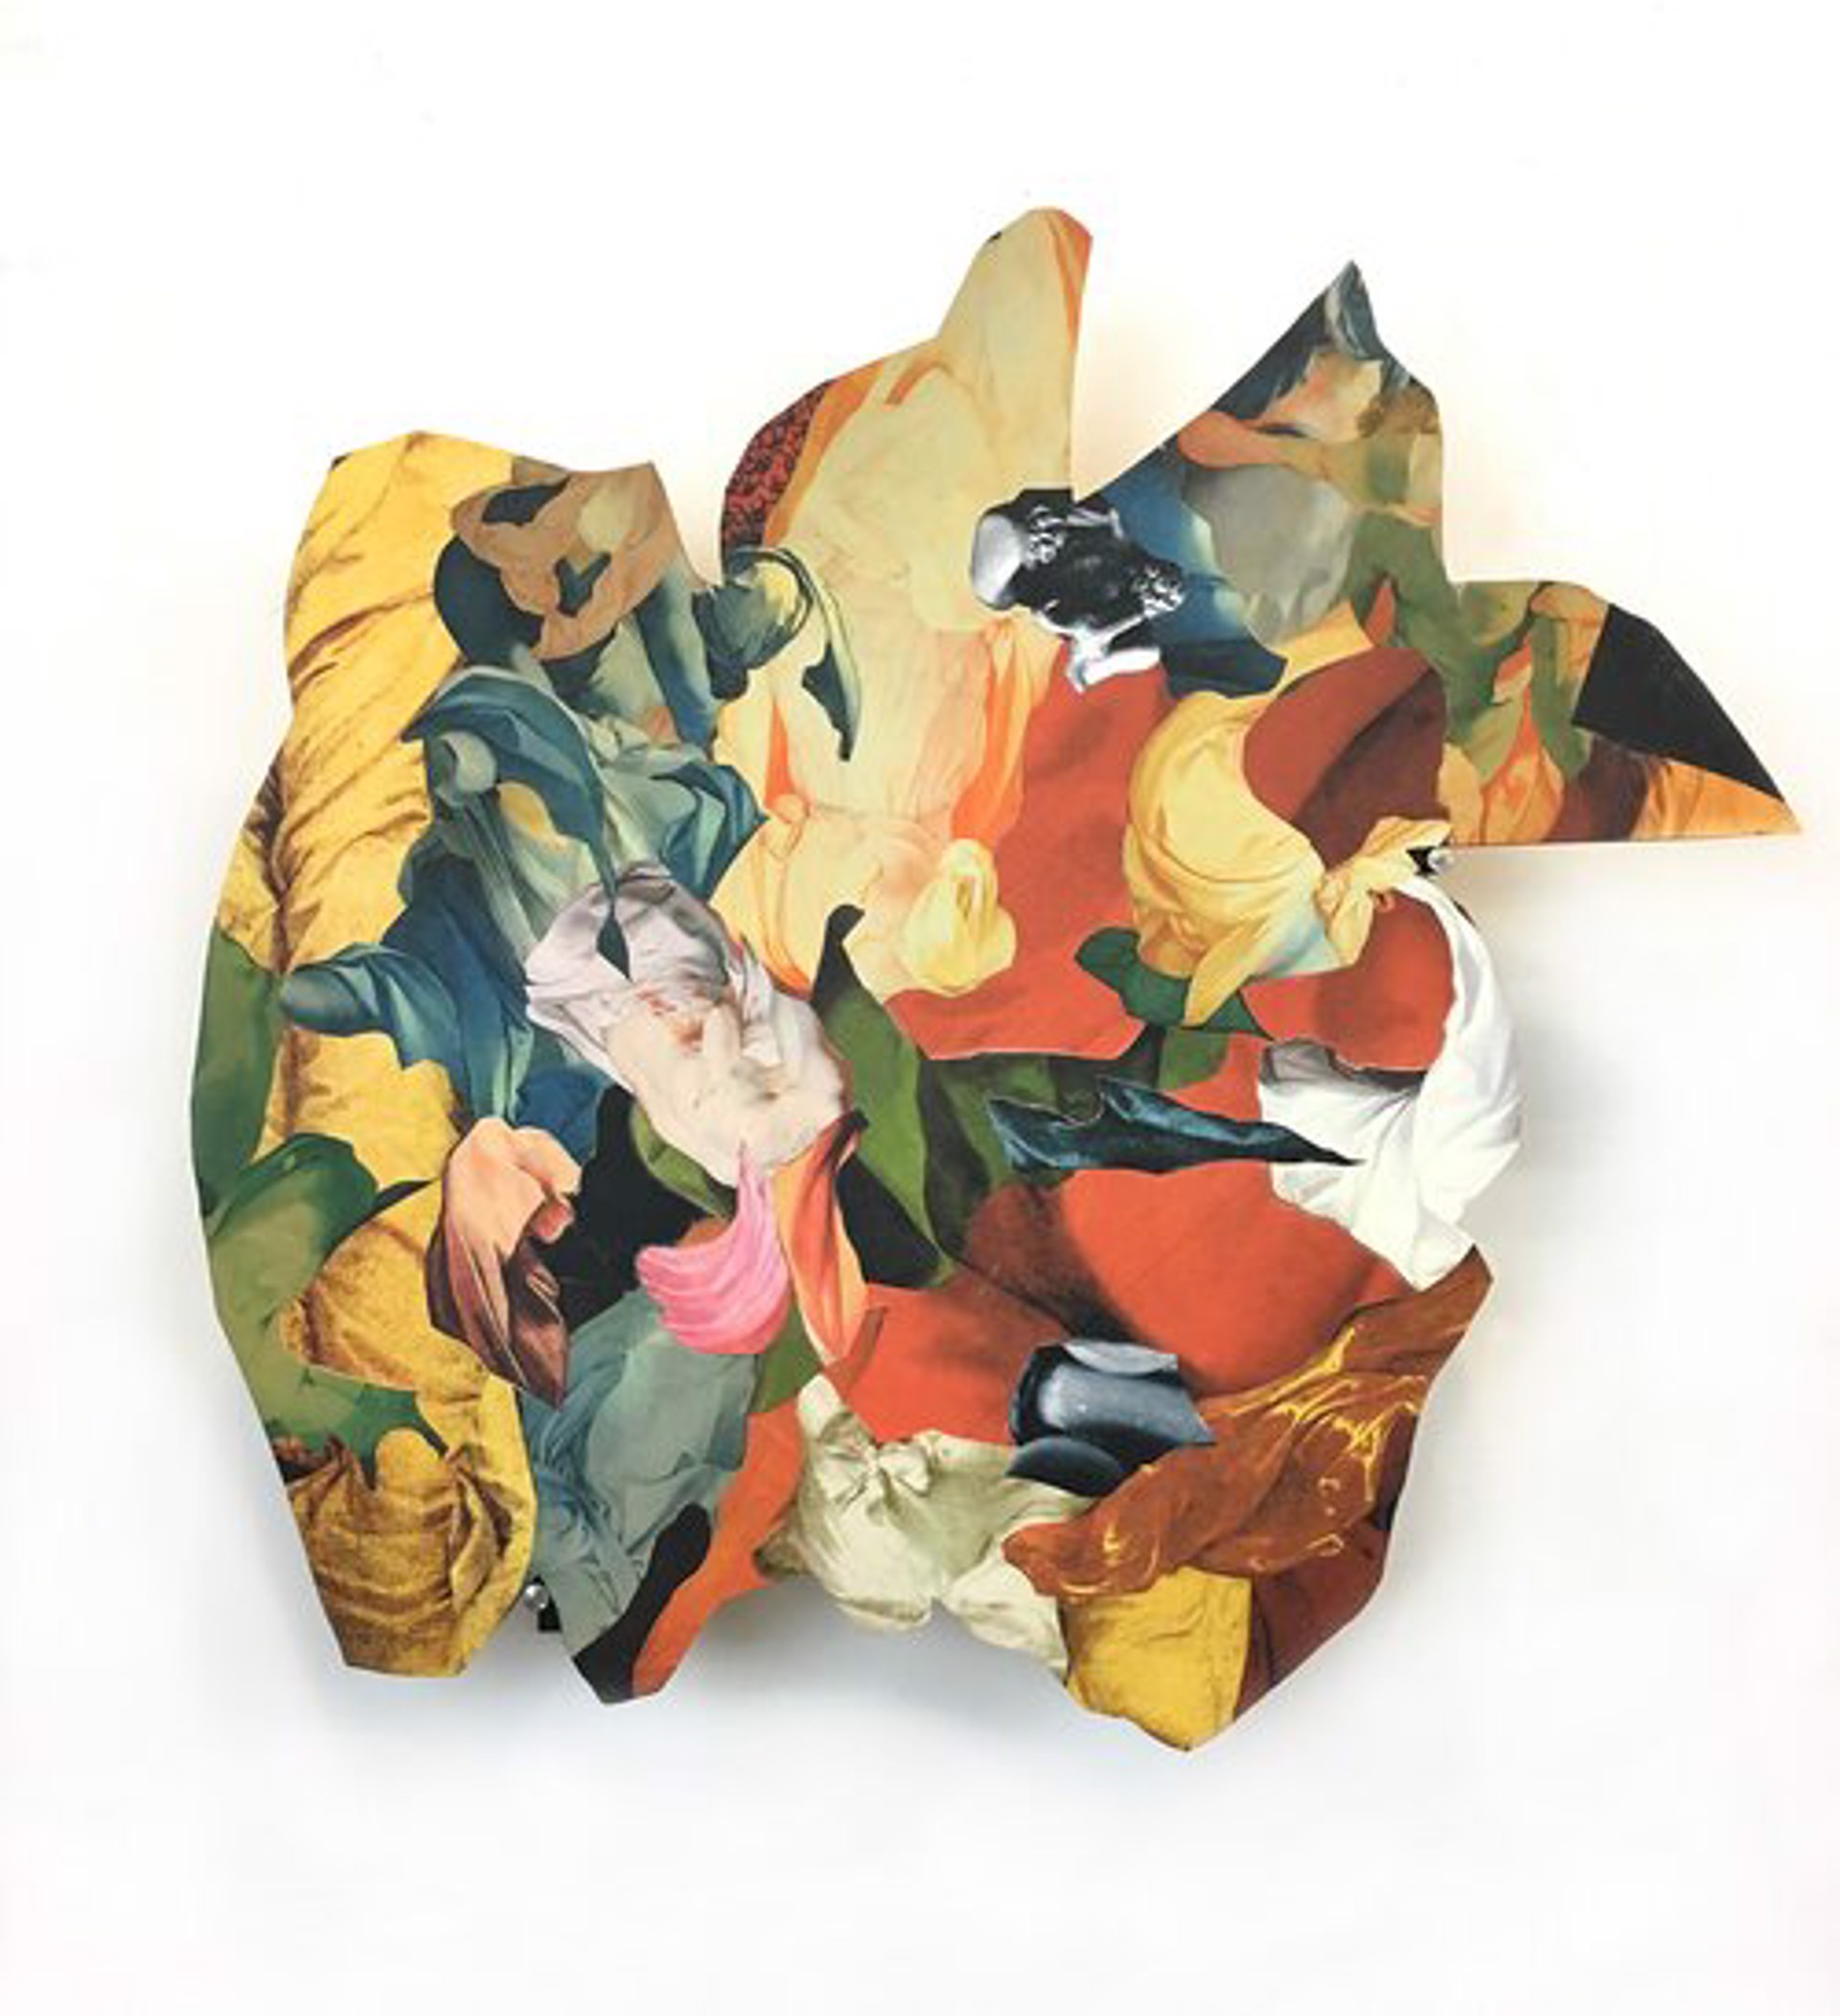 Untitled Shaped collage #2 by Ray Beldner